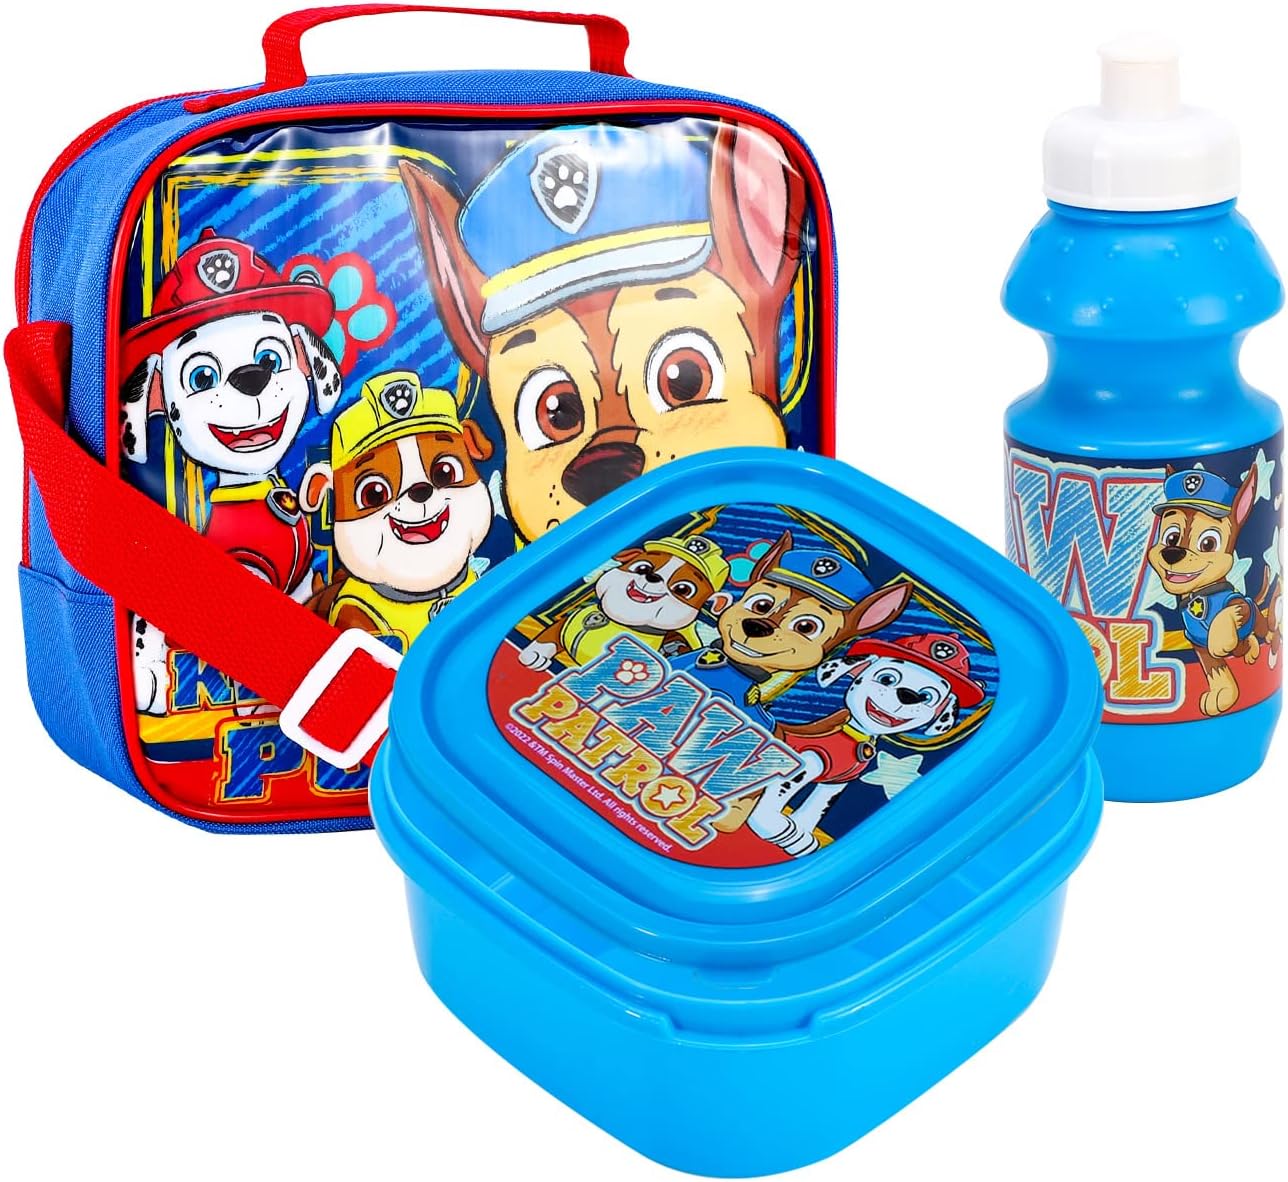 24 Pieces Kids Lunch Box In Doll Character Design - Lunch Bags & Accessories  - at 